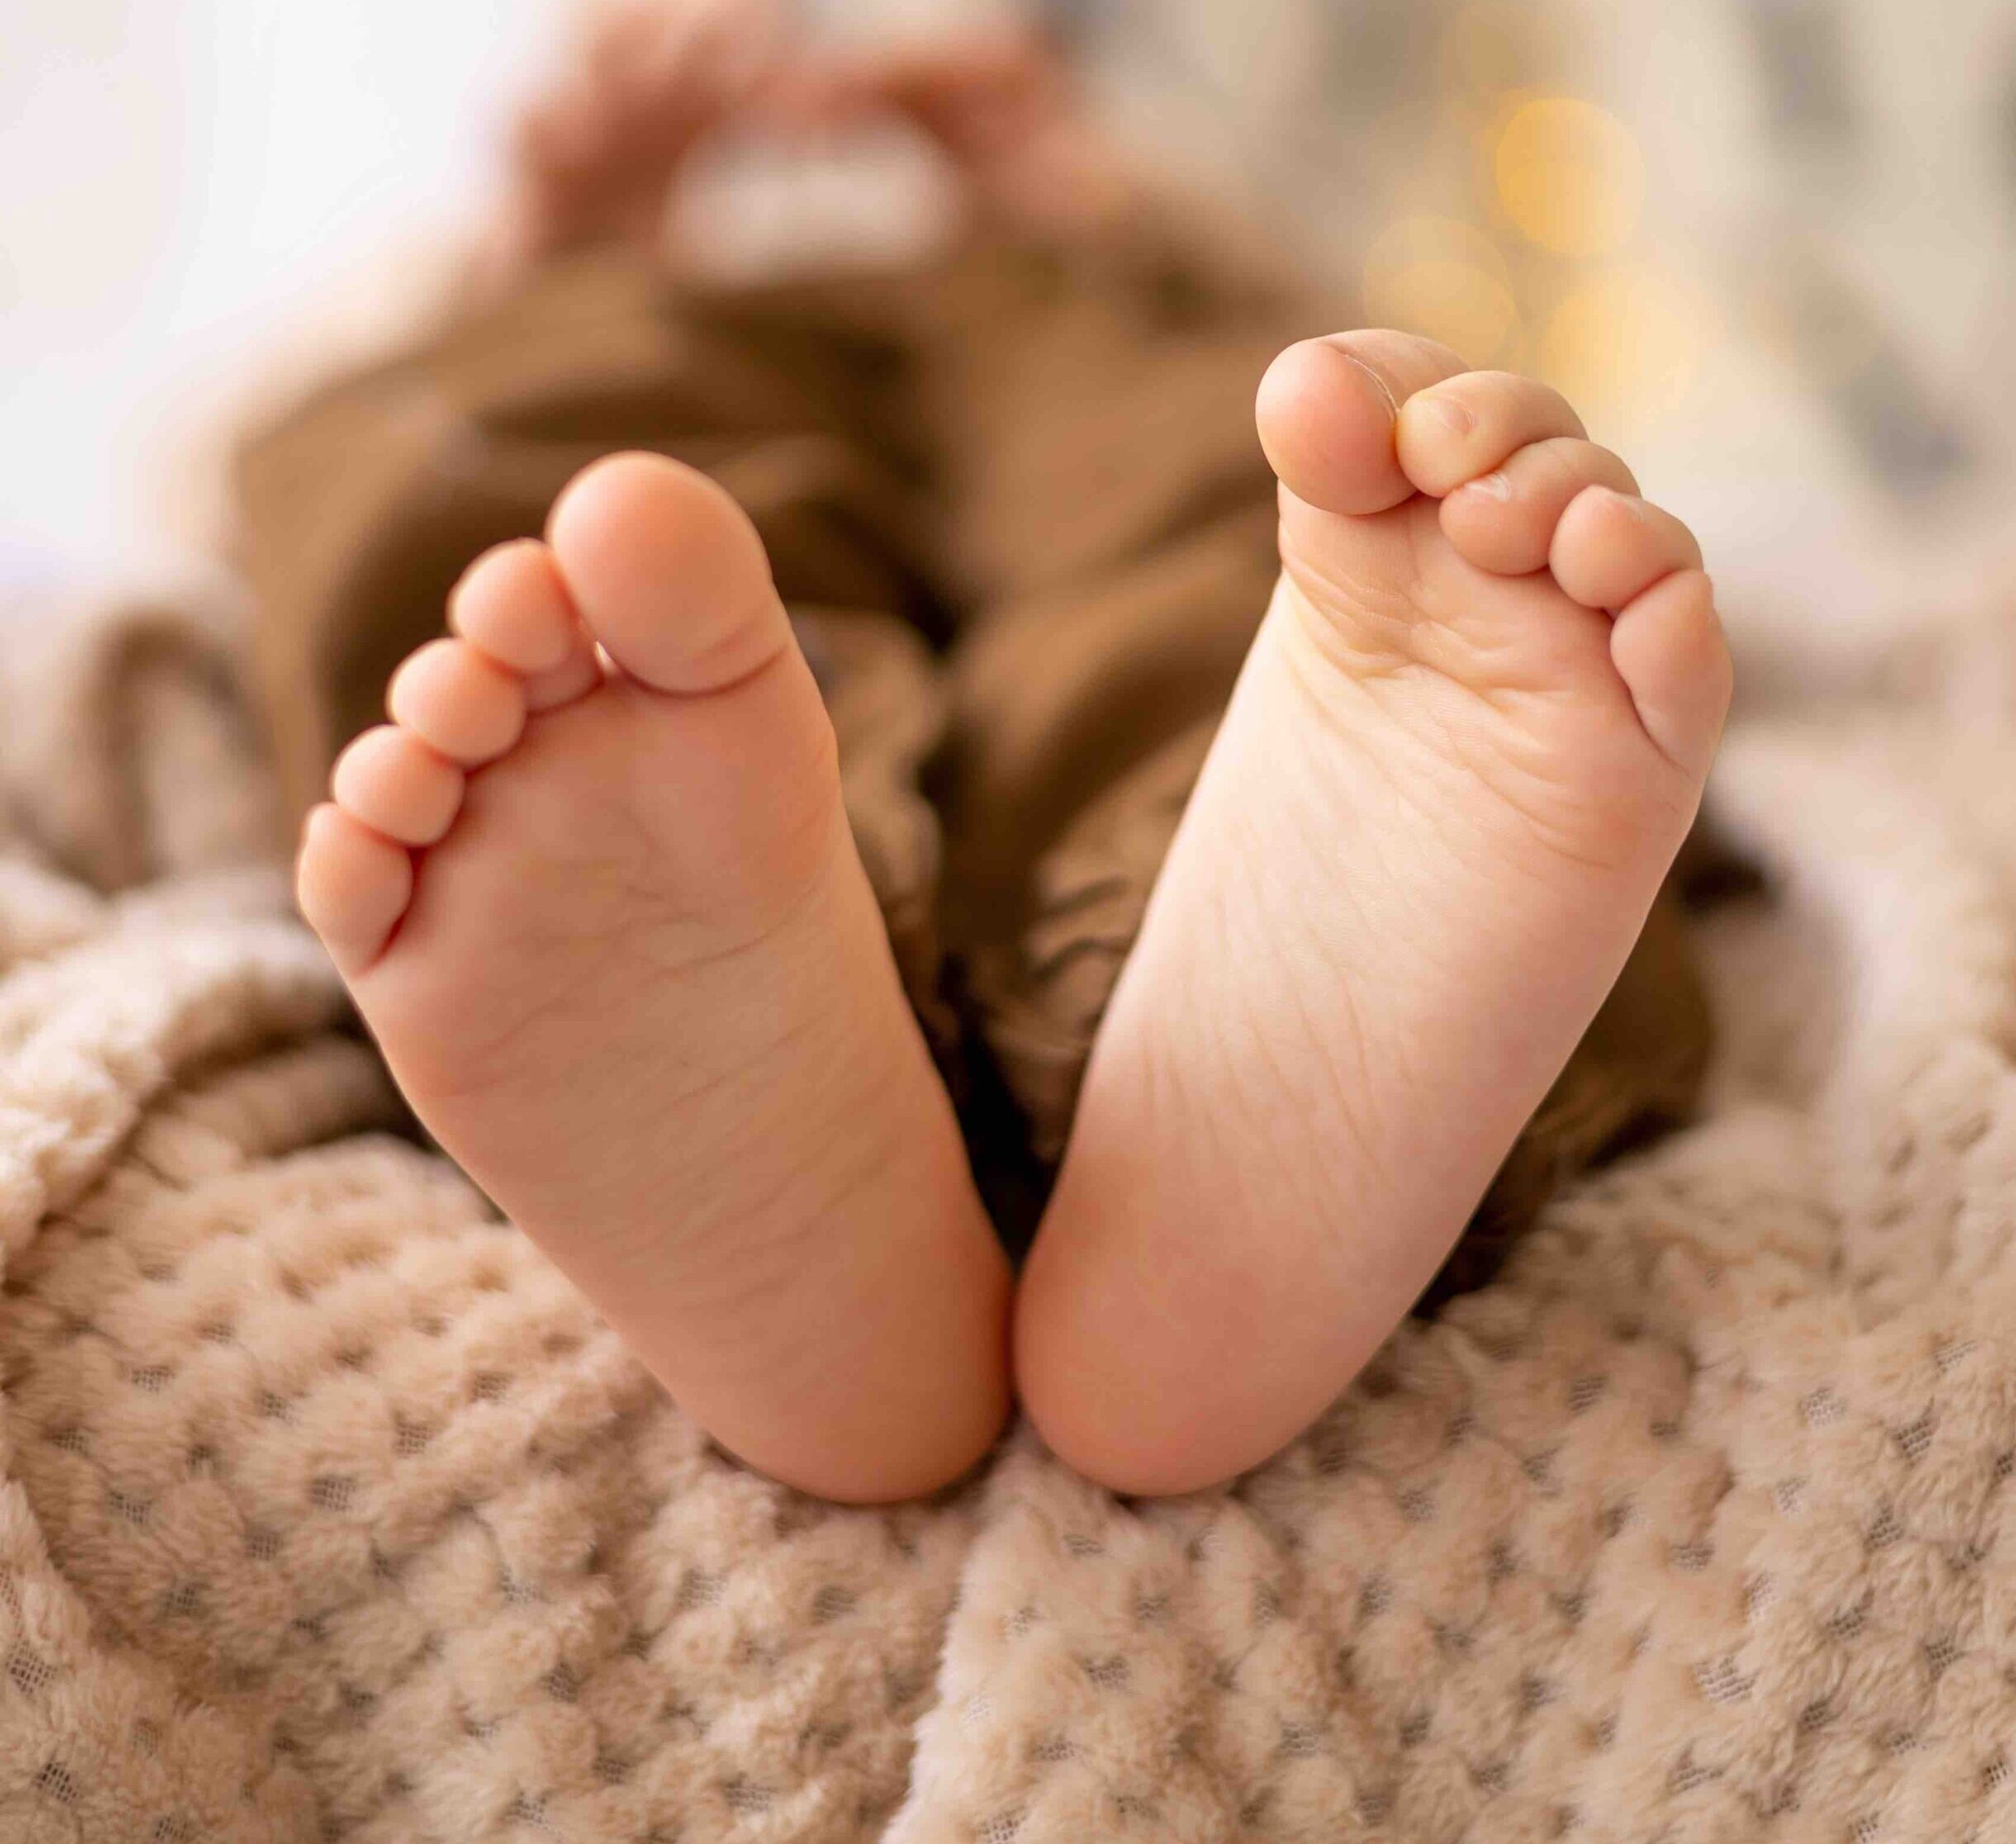 Child's feet with heel pain caused by Sever's Disease